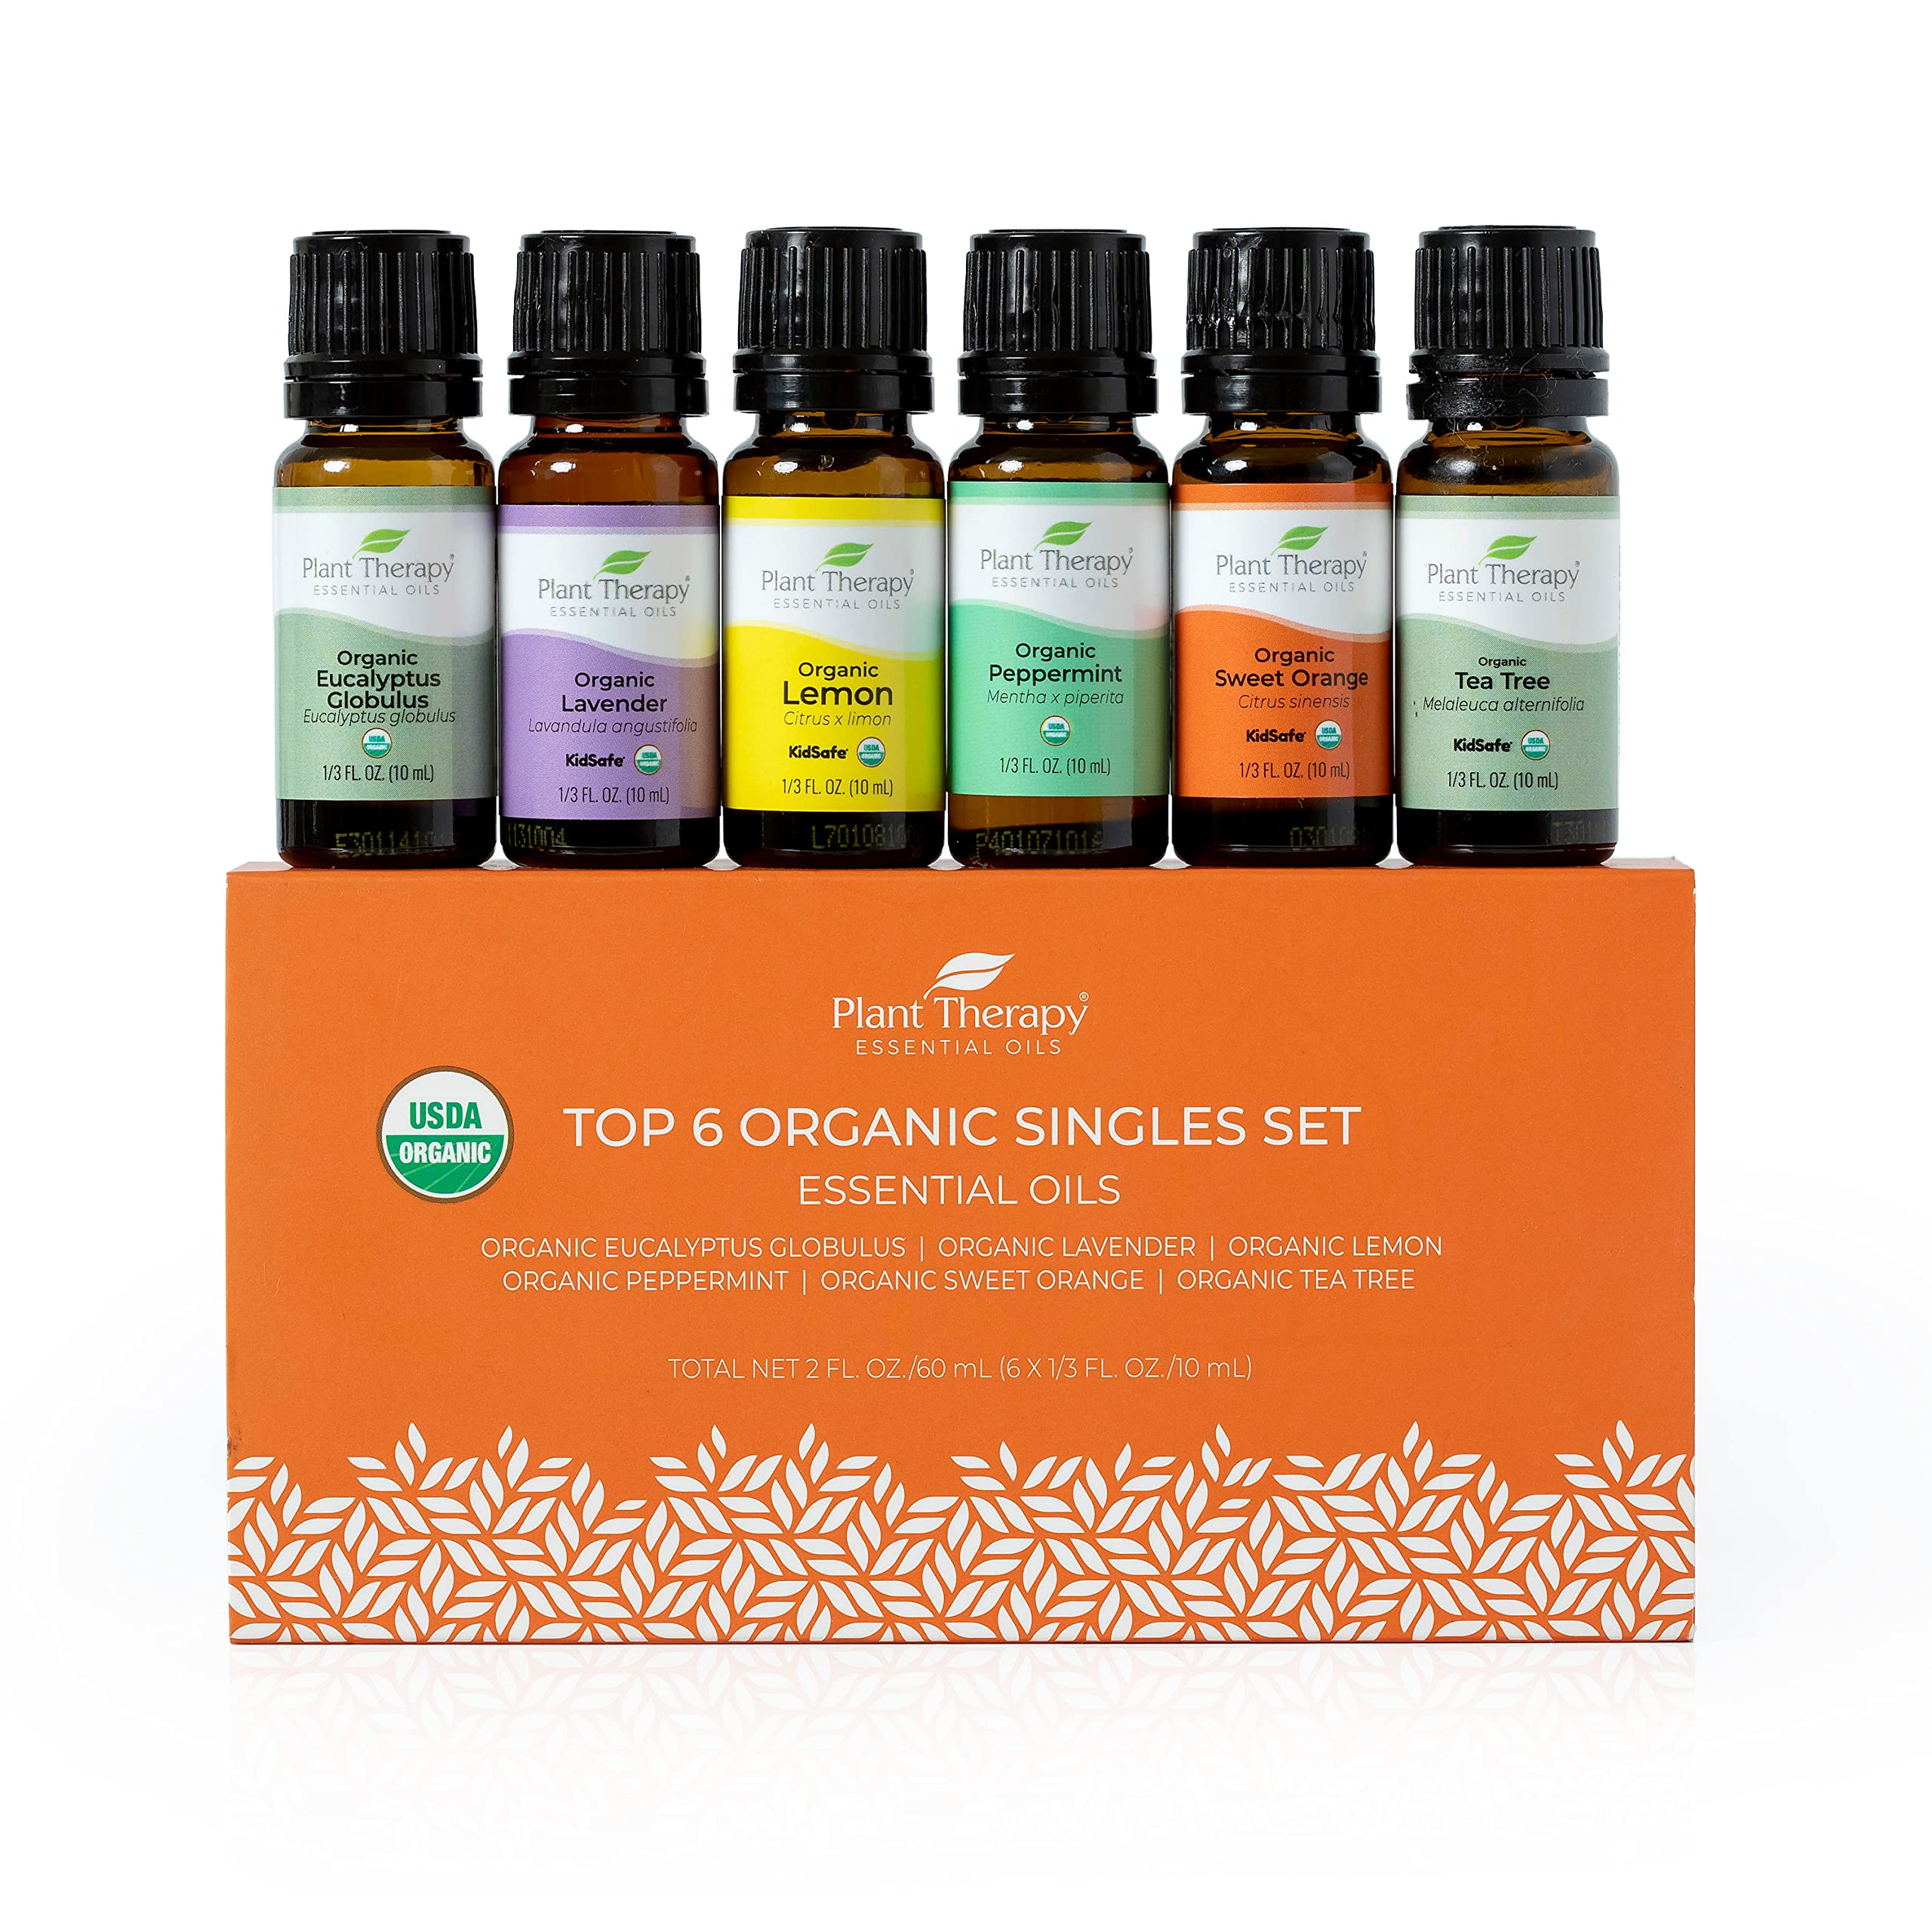 Plant Therapy Top 6 USDA Organic Essential Oil Set - Lavender, Peppermint, Eucalyptus, Lemon, Tea Tree 100% Pure, Natural Aromatherapy, For Diffusion & Topical Use, Therapeutic Grade 10 mL (1/3 oz)